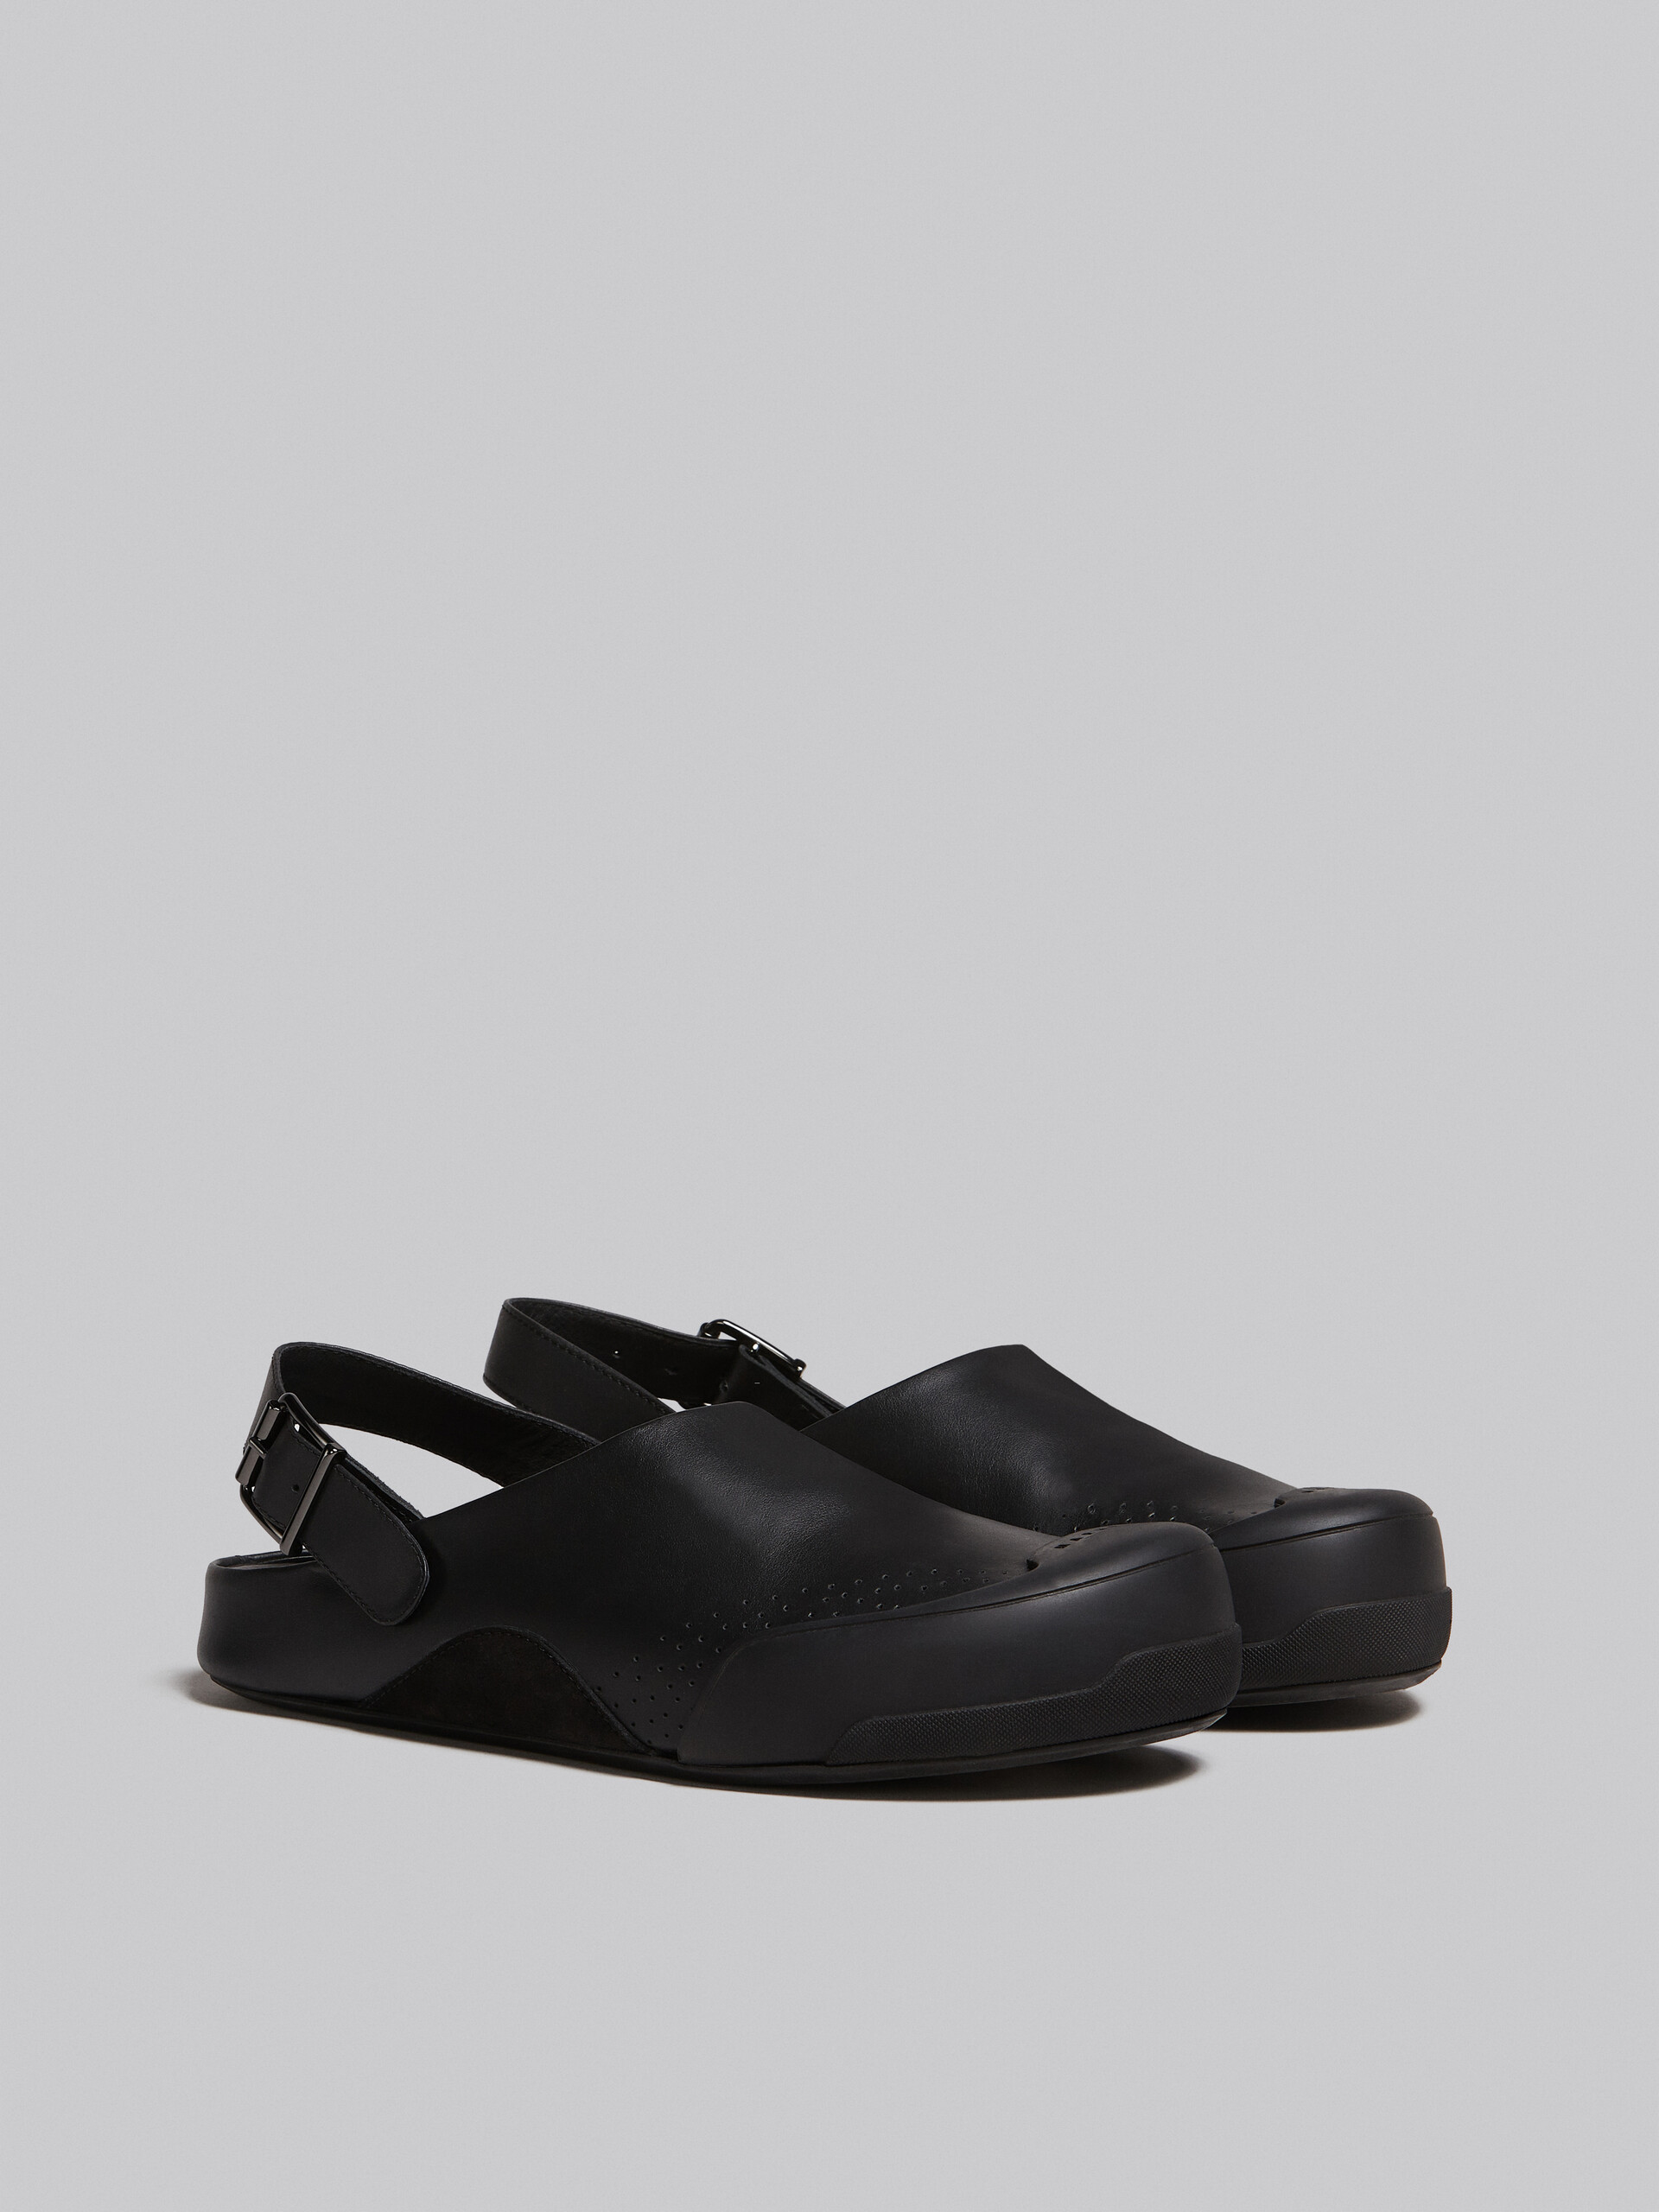 Black leather and suede Dada Sabot - Clogs - Image 2